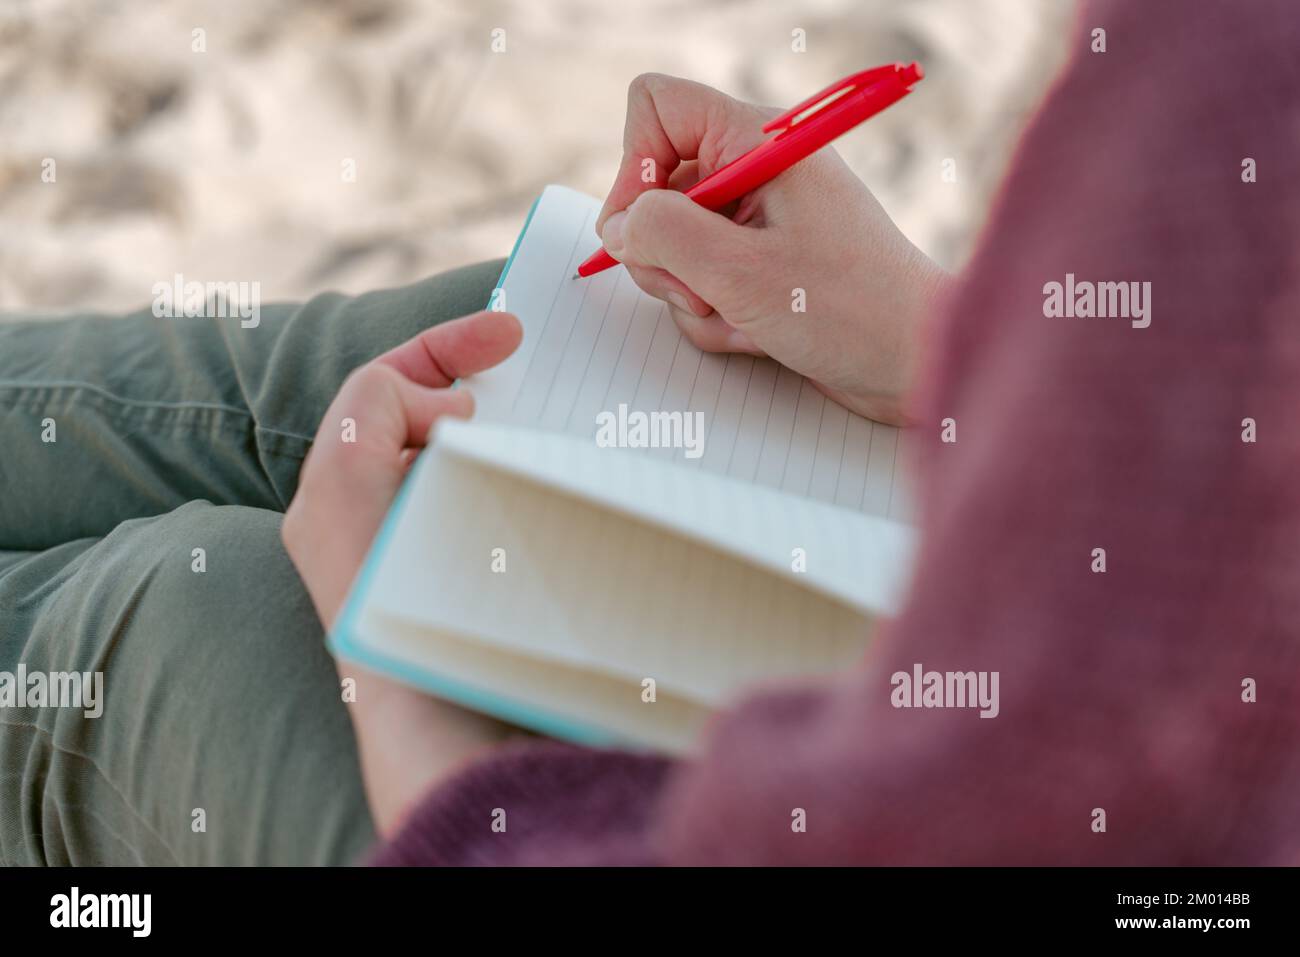 Cropped photo of a diarist writing with a pen on the blank page in the open notebook. Stock Photo